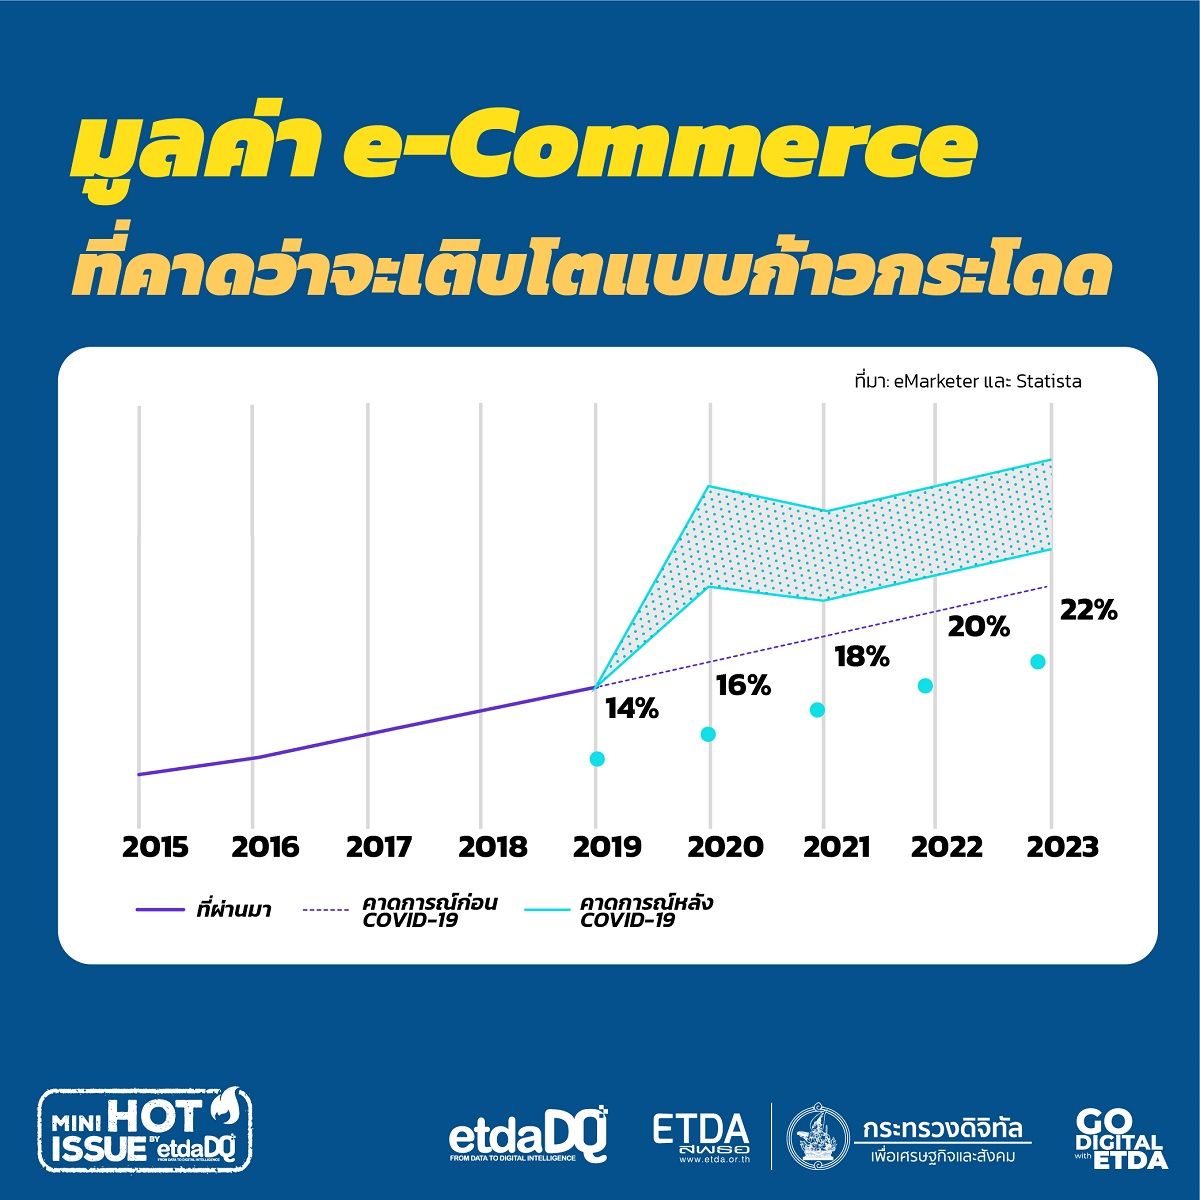 info_Perspective-on-Future-of-e-Commerce-05-(1).jpg